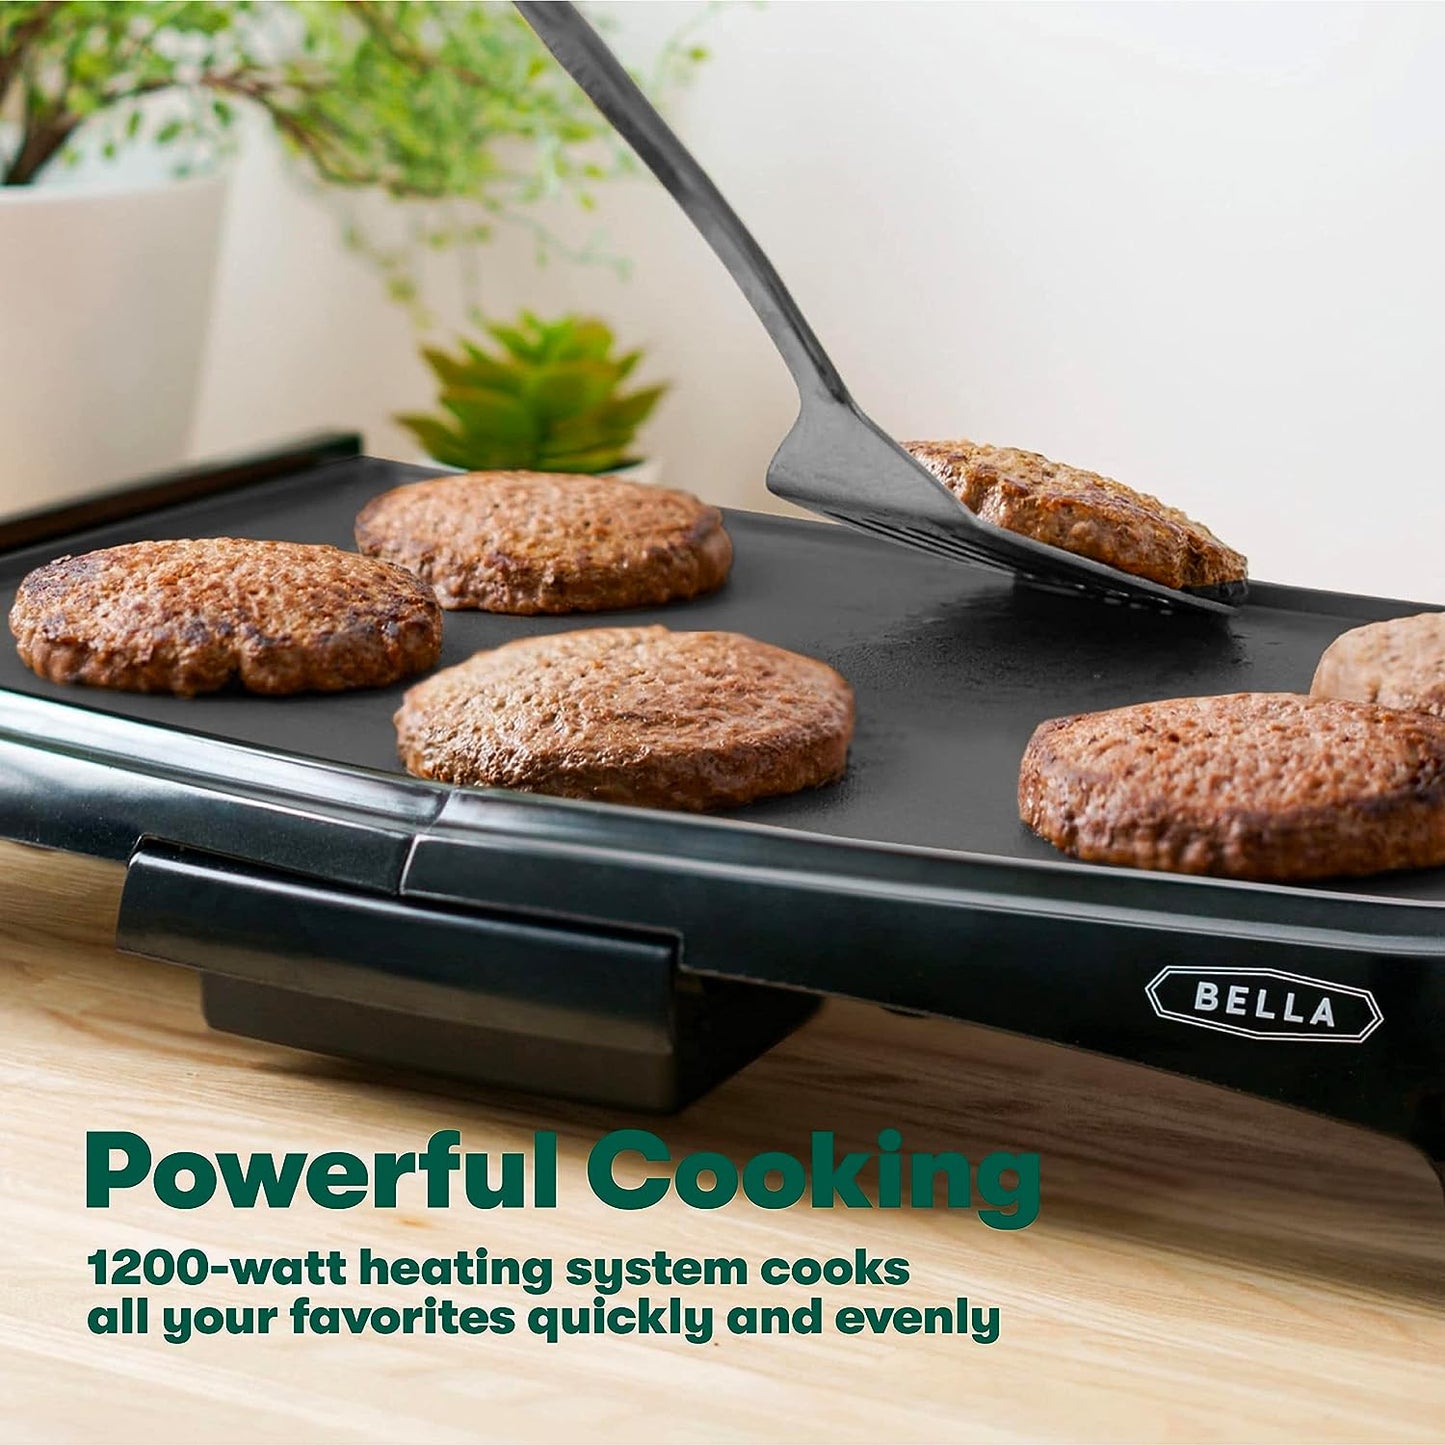 BELLA Electric Griddle with Crumb Tray - Smokeless Indoor Grill, Nonstick Surface, Adjustable Temperature Control Dial & Cool-touch Handles, 10" x 16", Black